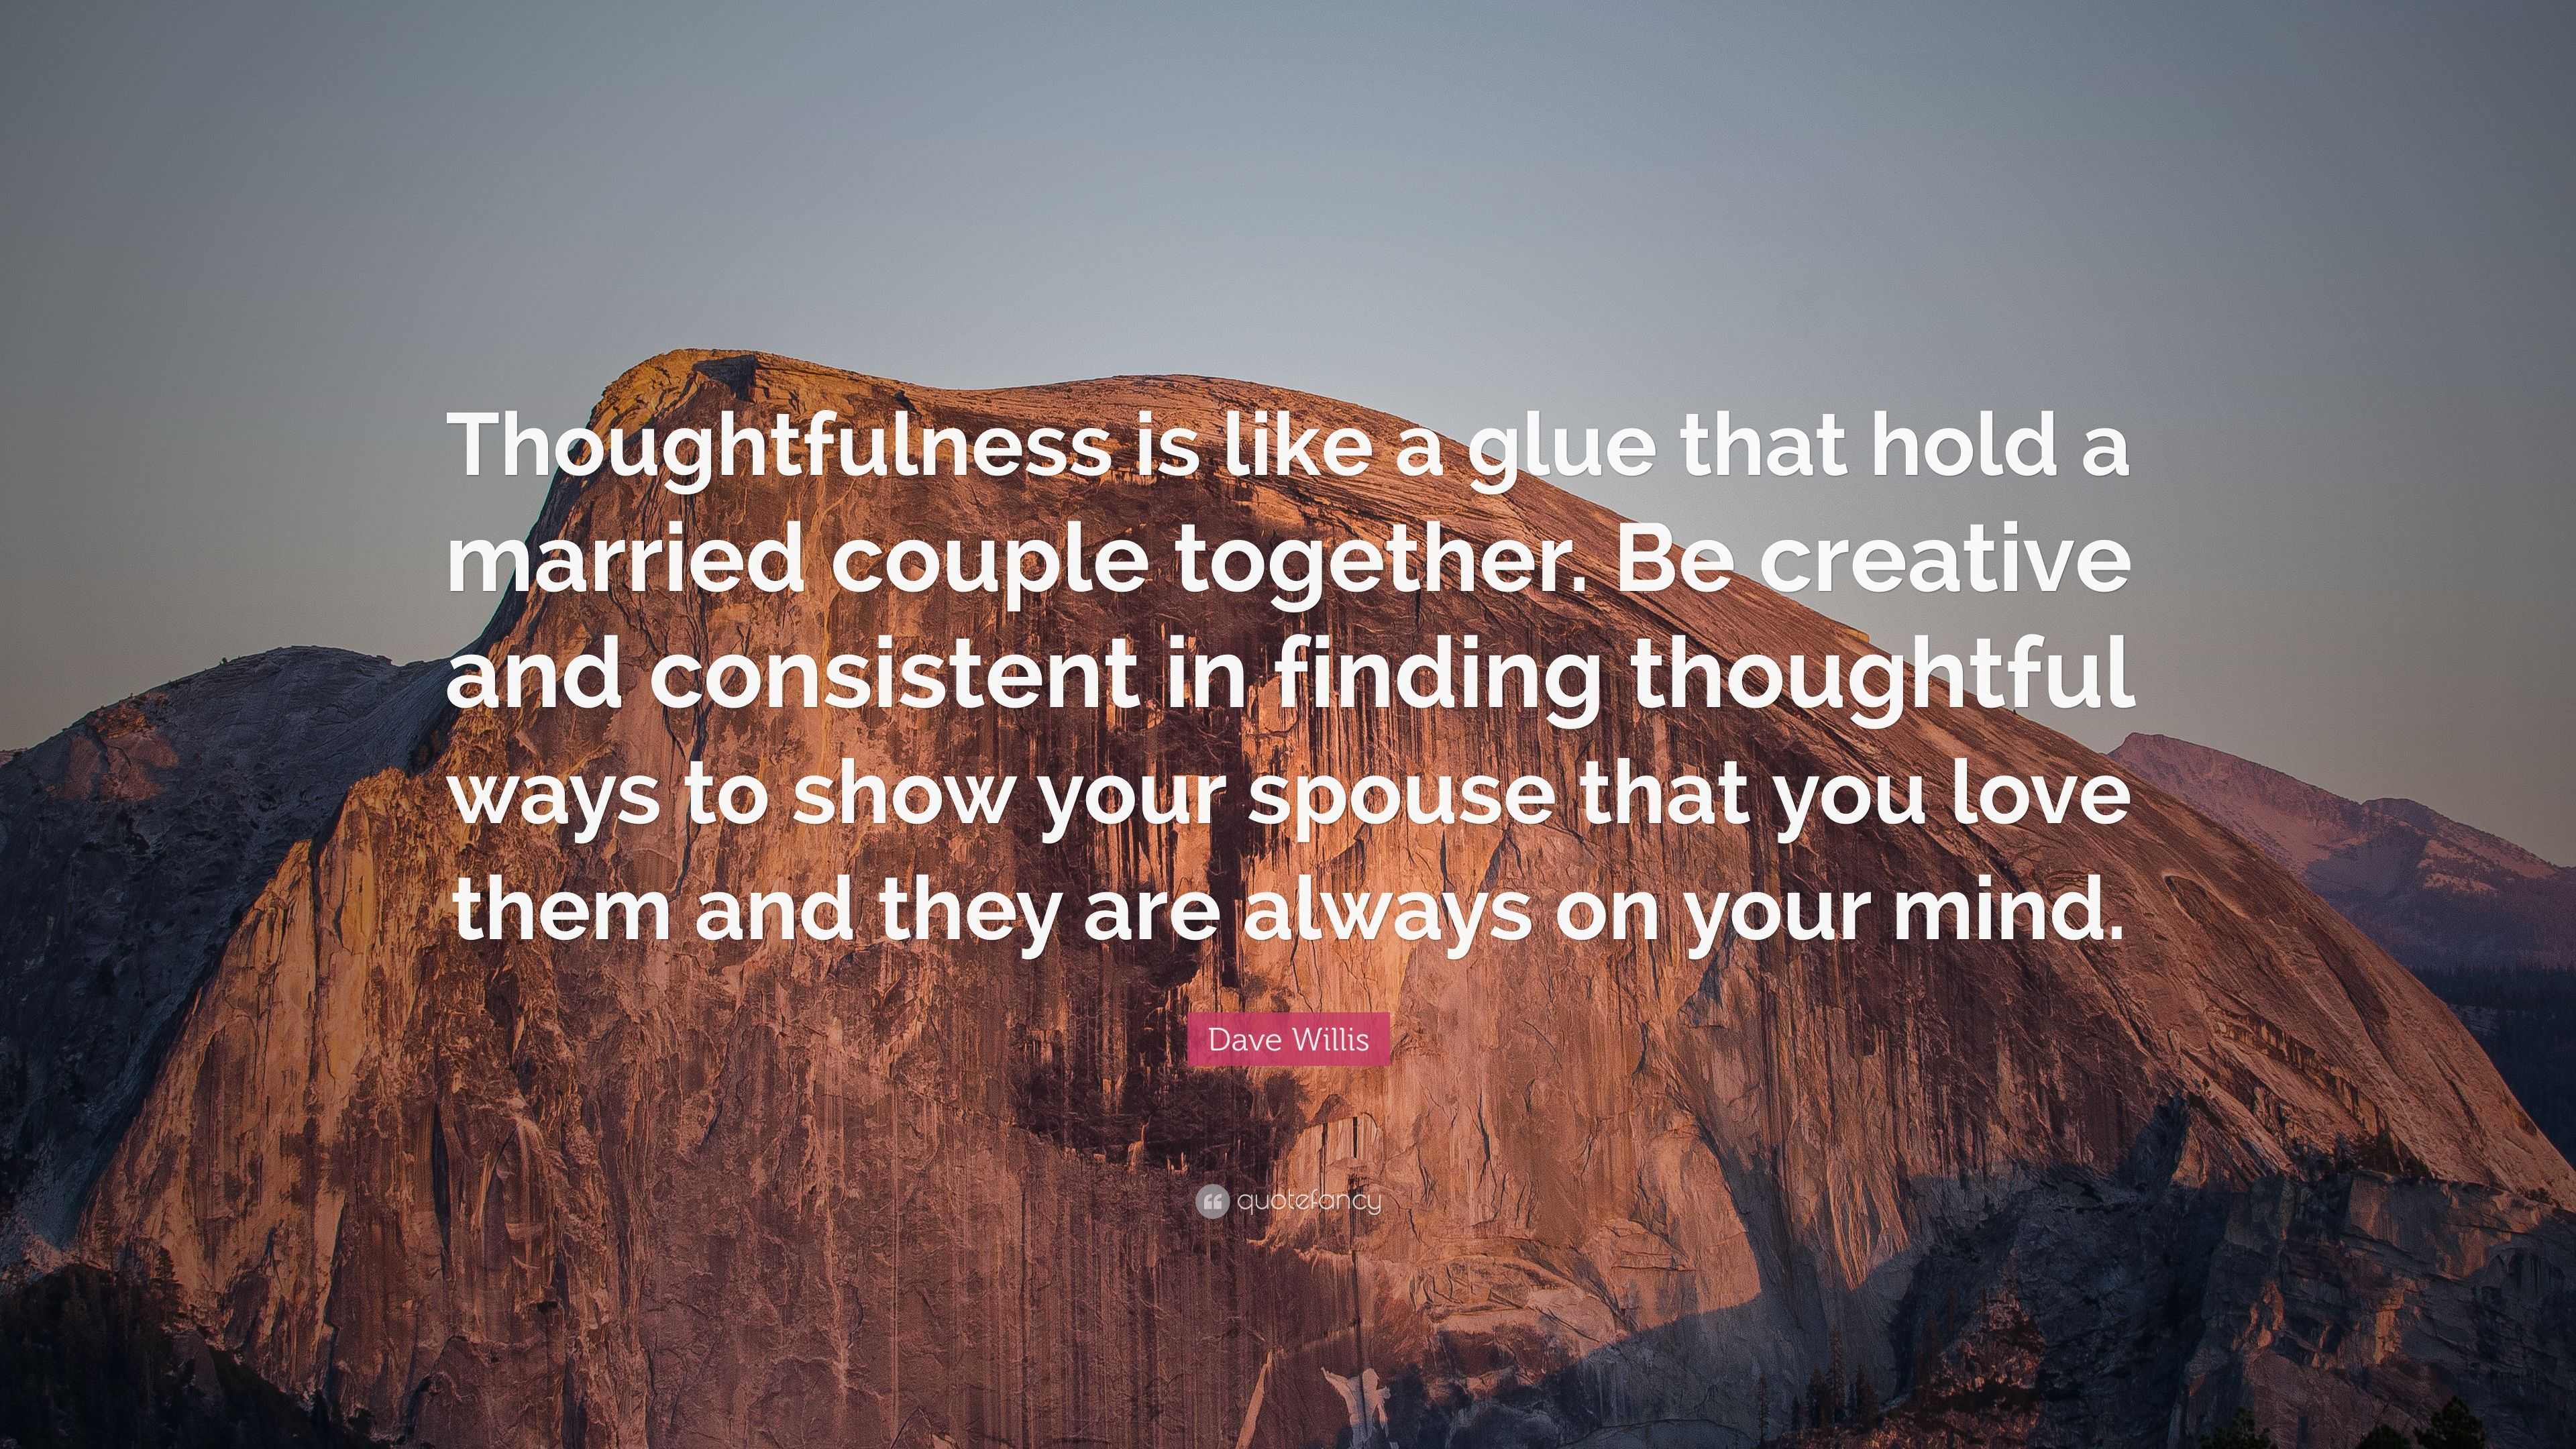 Dave Willis Quote: “Thoughtfulness is like a glue that hold a married ...